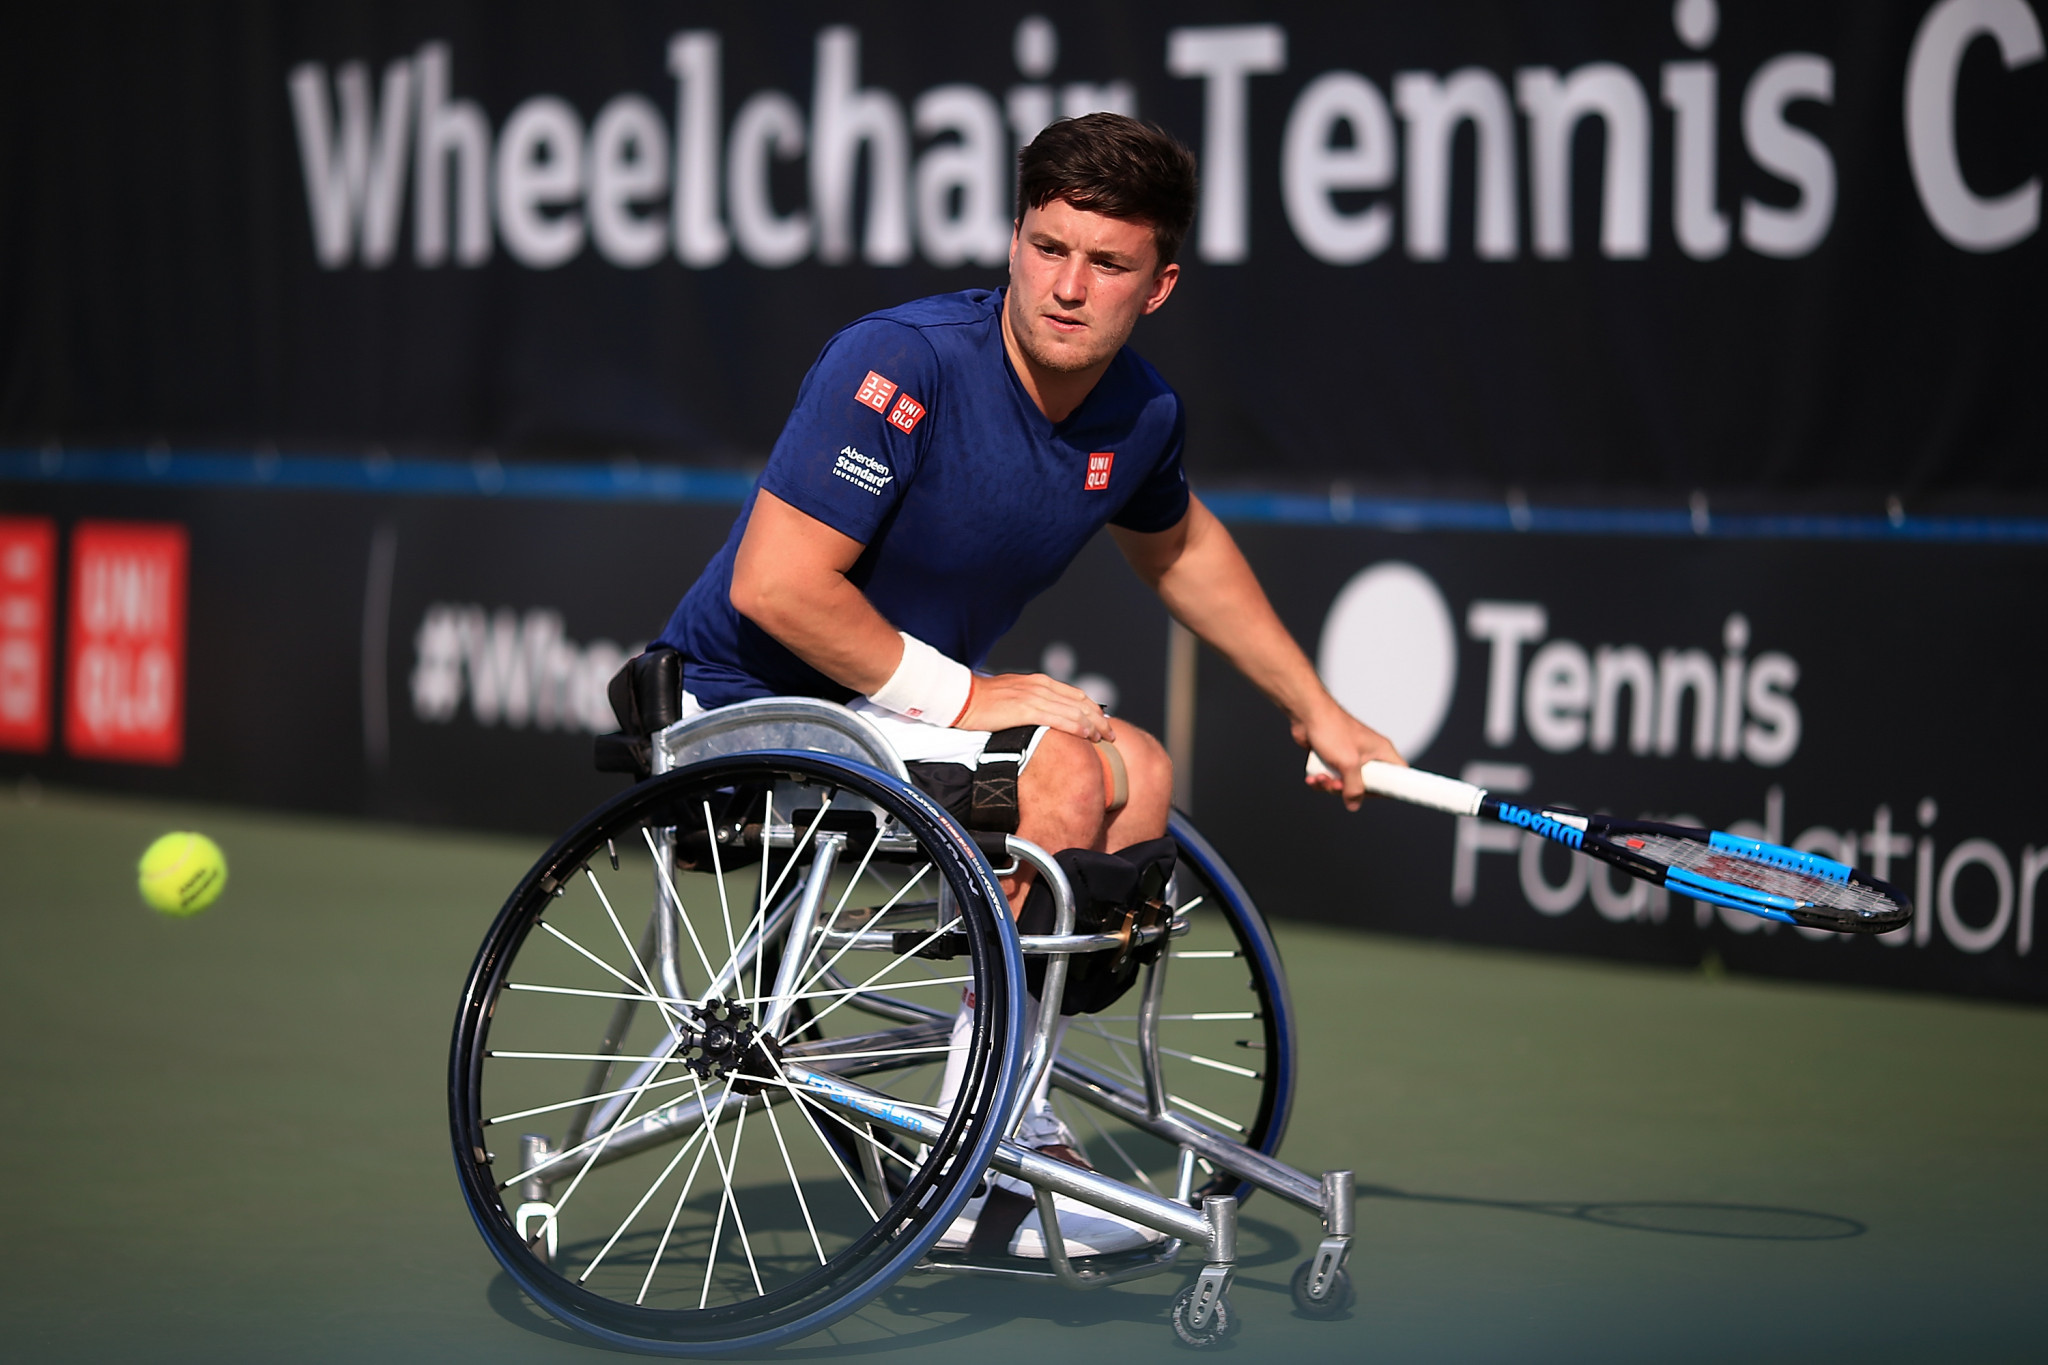 Great Britain’s Gordon Reid beat higher-seeded opponent Joachim Gérard of Belgium today to secure his place in the men’s singles semi-finals at the Bendigo Wheelchair Tennis Open in Australia ©Getty Images